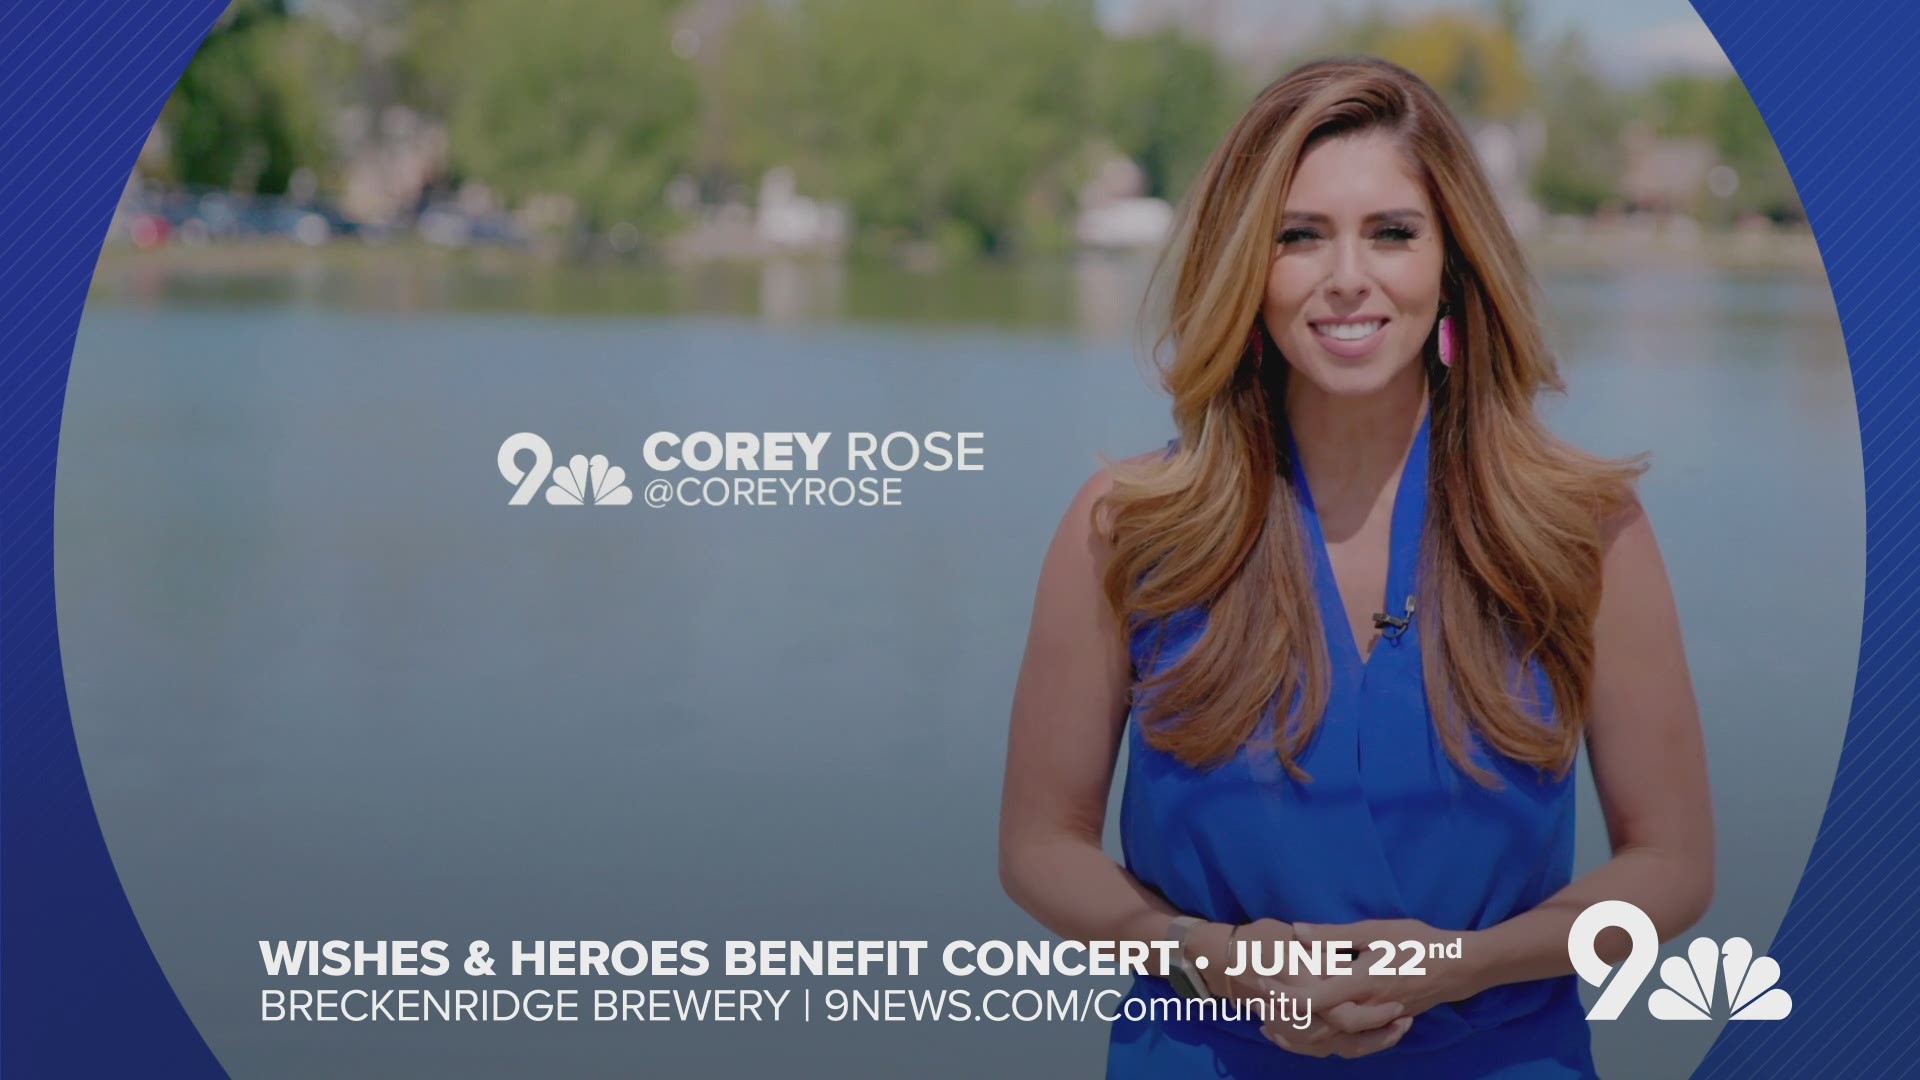 The 9th annual Corey Rose Wishes and Heroes Benefit Concert will be held Saturday, June 22 at Breckenridge Brewery in Littleton. The event, which begins at 3 p.m., features a silent auction with items donated by local merchants, delicious food and beverages and live music from 9's A Pair (composed of Colorado firefighters) and Phat Daddy. Proceeds from the event benefit Make-A-Wish Colorado and the Colorado Professional Firefighters Association. Head to TicketWeb.com for tickets.